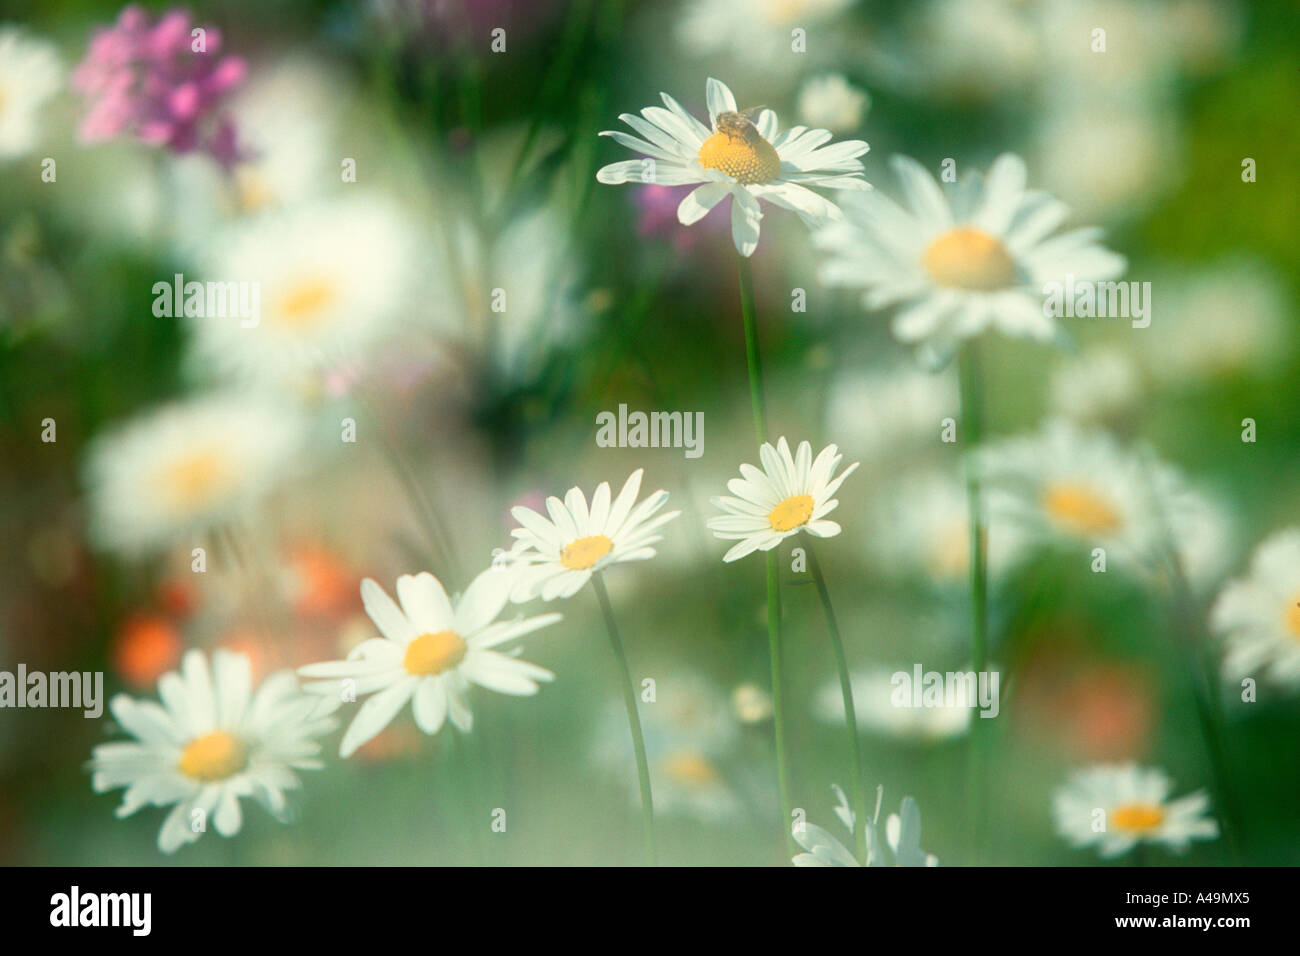 Meadow with flowers / Blumenwiese Stock Photo